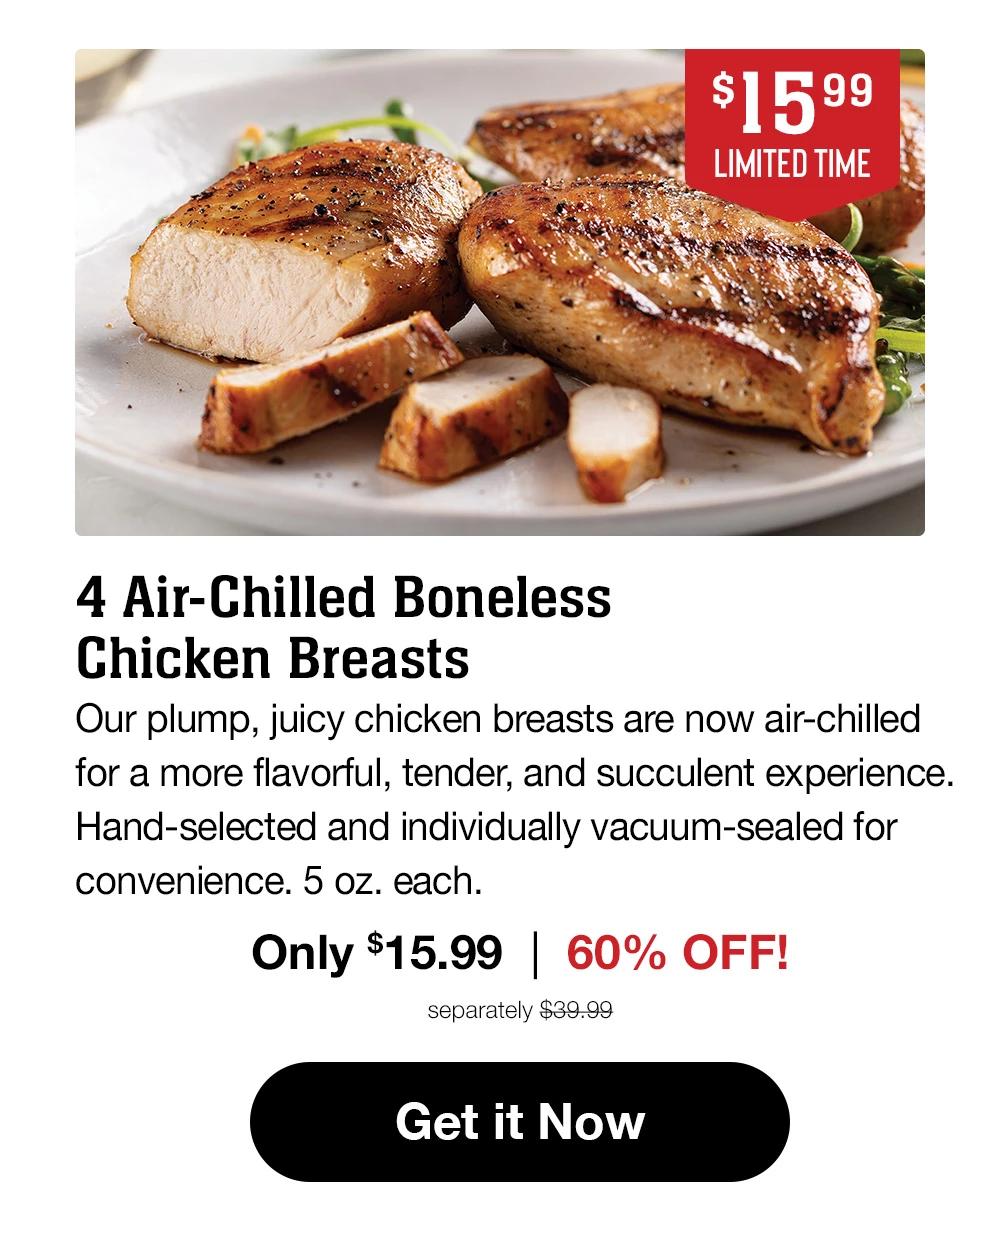 $15.99 LIMITED TIME | NEW 4 Air-Chilled Boneless Chicken Breasts | Our plump, juicy chicken breasts are now air-chilled for a more flavorful, tender, and succulent experience. Hand-selected and individually vacuum-sealed for convenience. 5 oz. each. | Only $15.99 | 54% OFF! | separately $39.99 || Get it Now